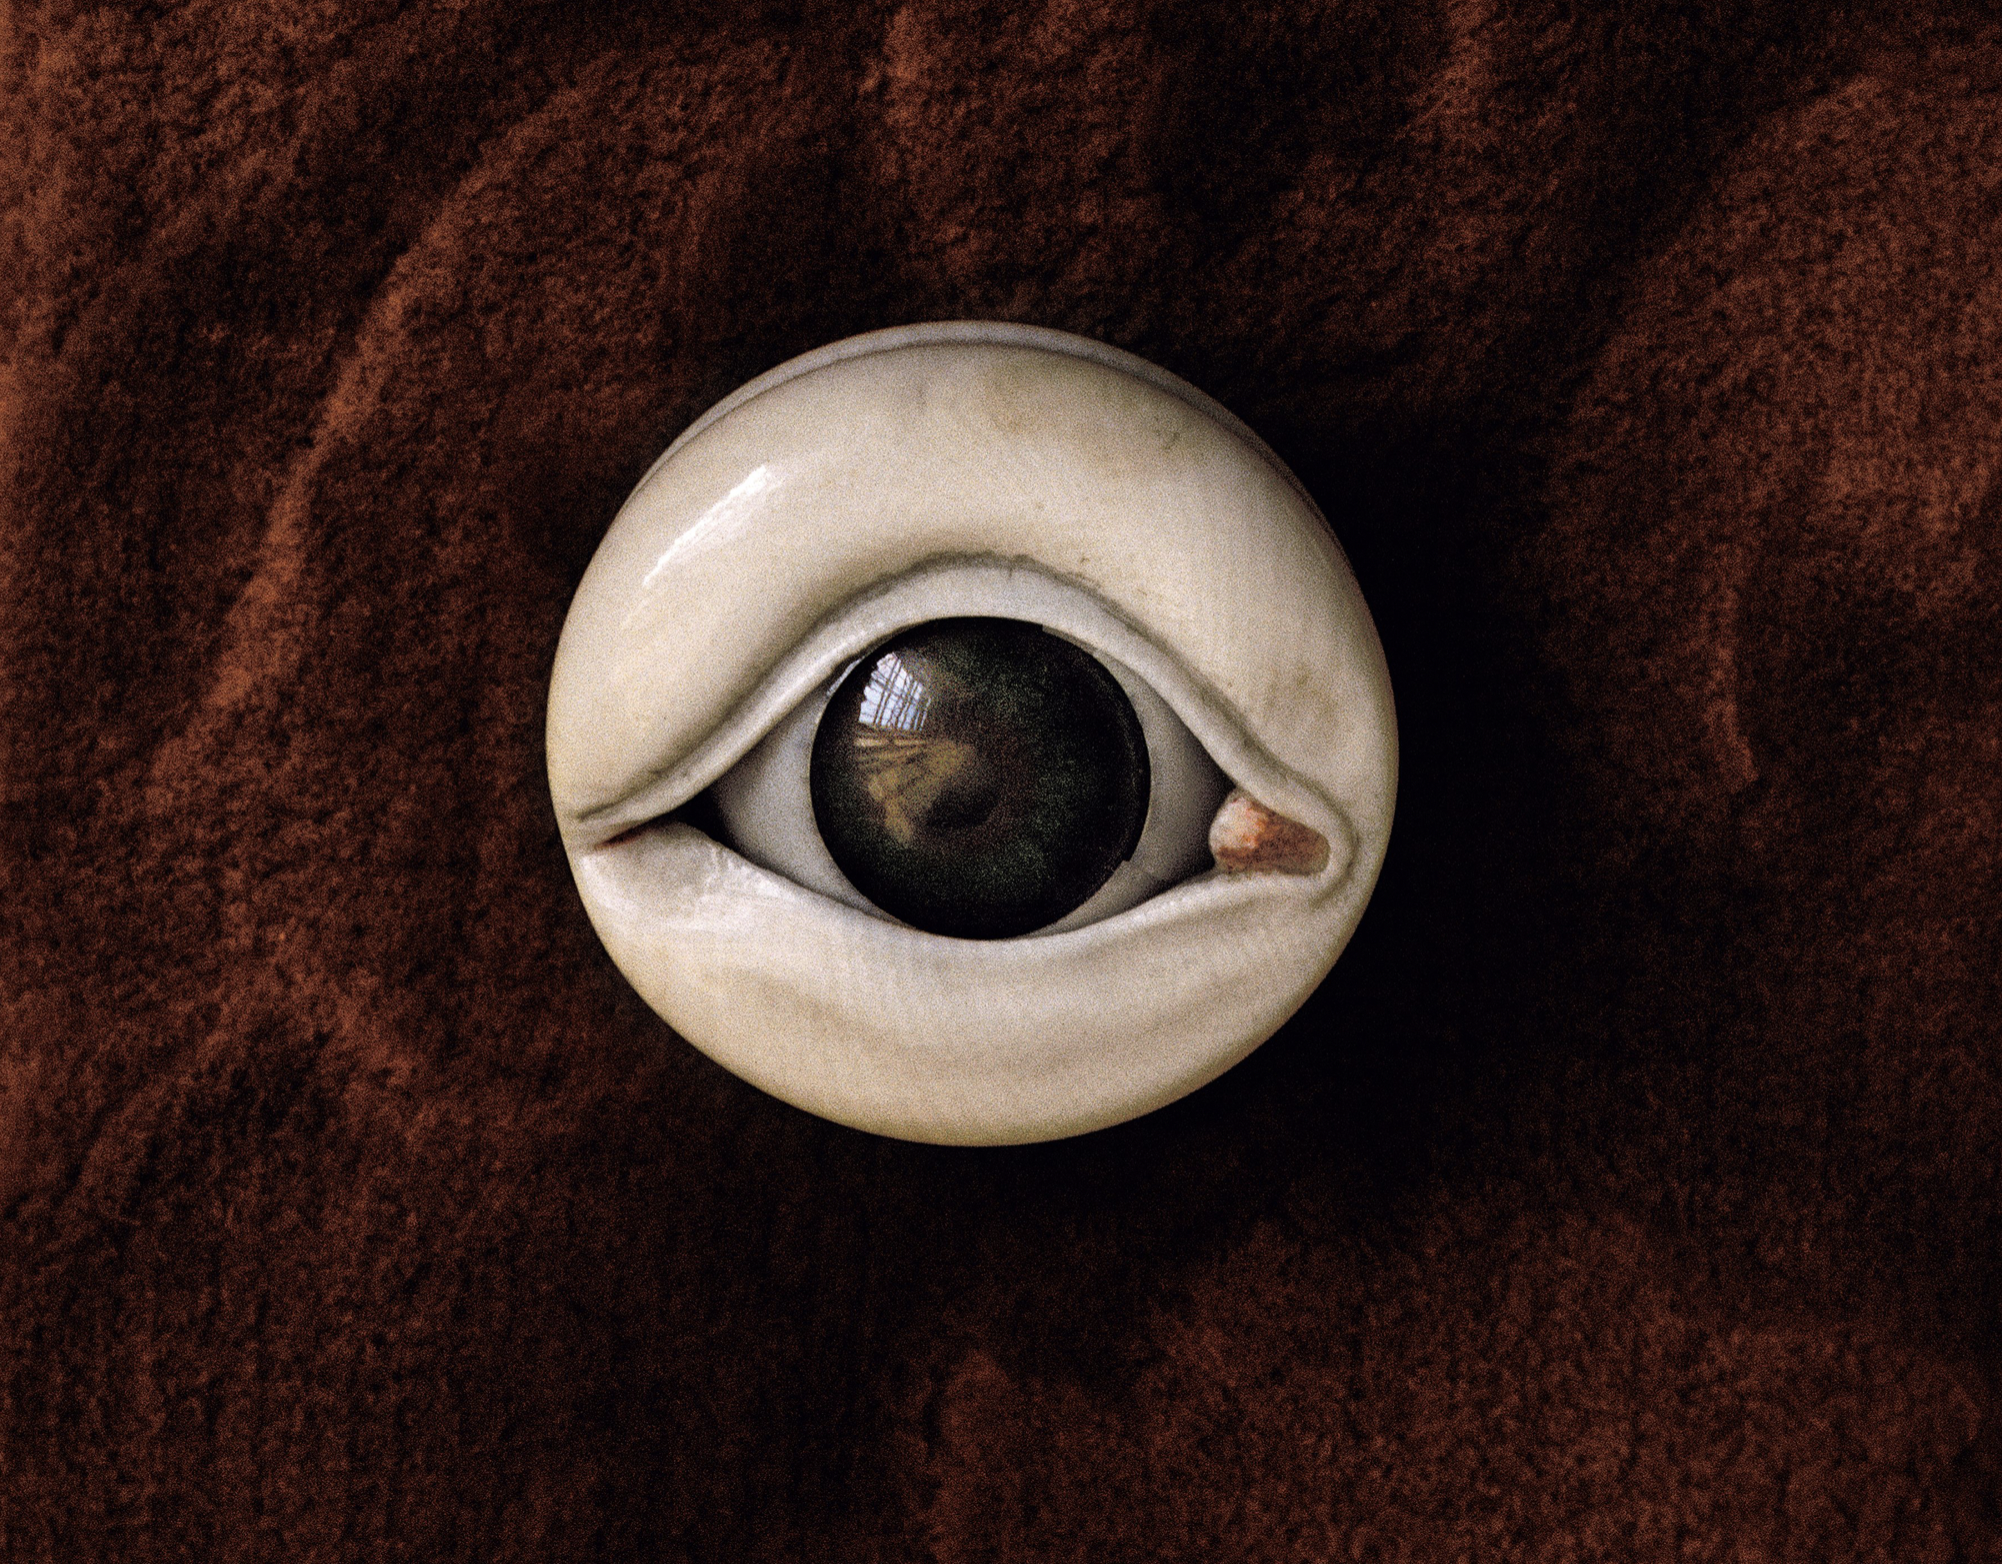 Rosamond Purcell, ‘Eye Made of Glass, Antler Bone, and Metal, Collection of Peter the Great, Kunstkamera, St. Petersburg, circa 1990. Inkjet print, dimensions variable. Courtesy of the artist. © Rosamond Purcell